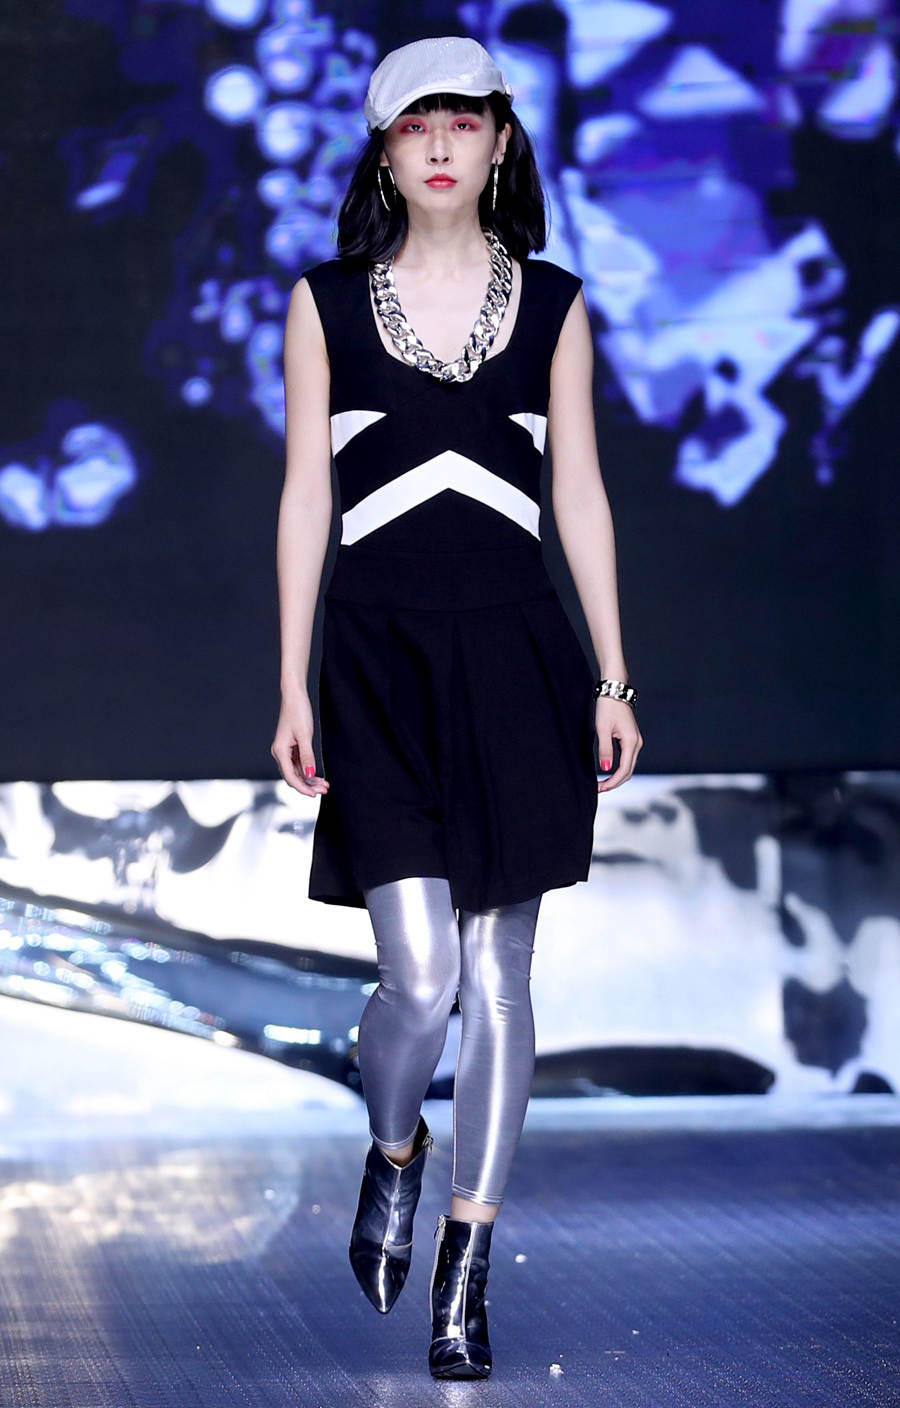 Creations presented during fashion show in China's Shandong